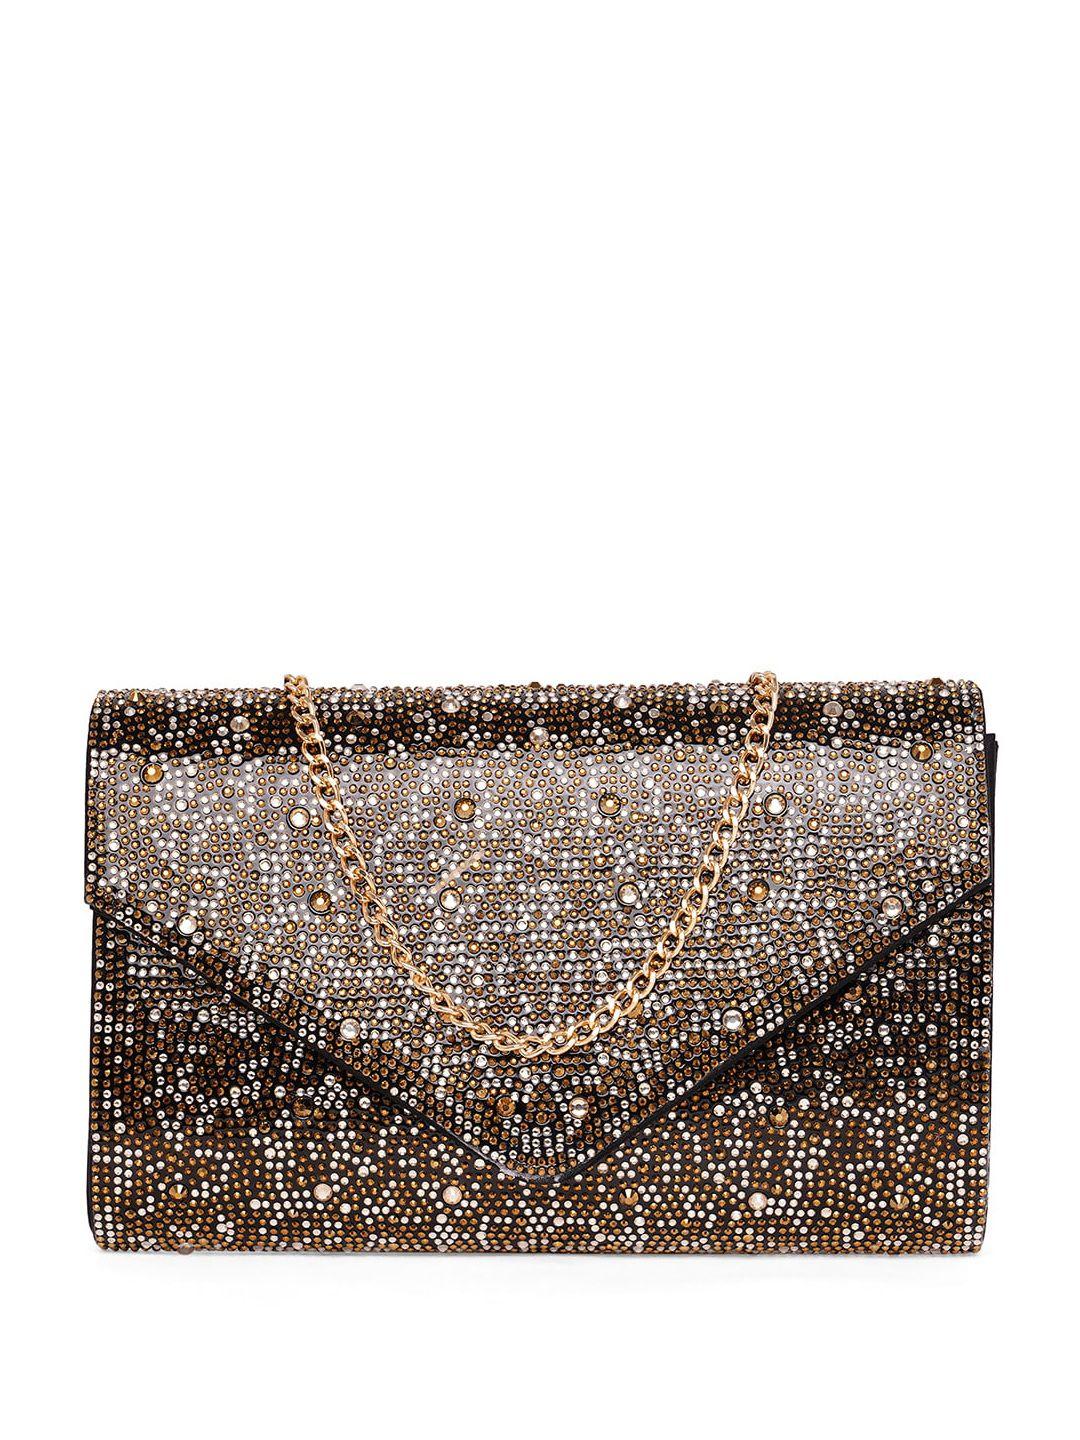 aldo embroidered purse clutch with shoulder strap